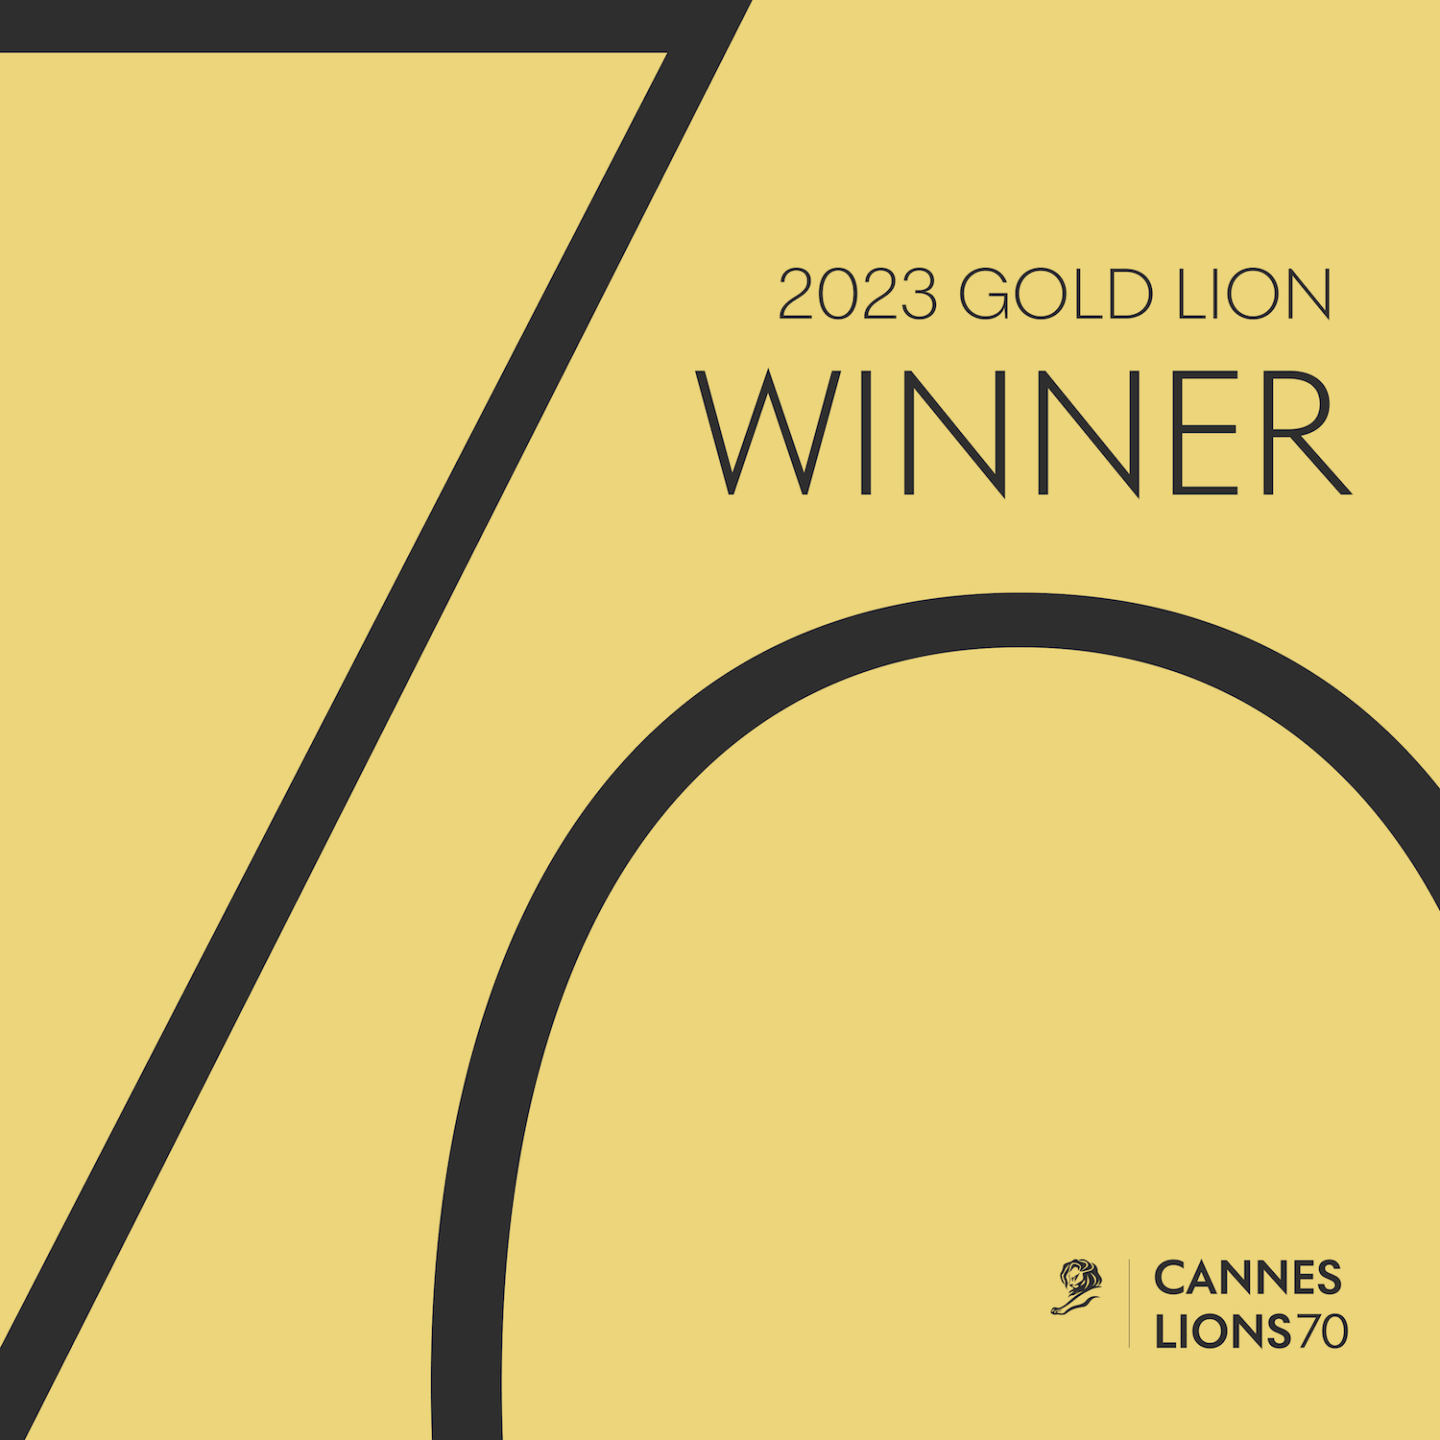 Gold background with 2020 Gold Lion Winner text